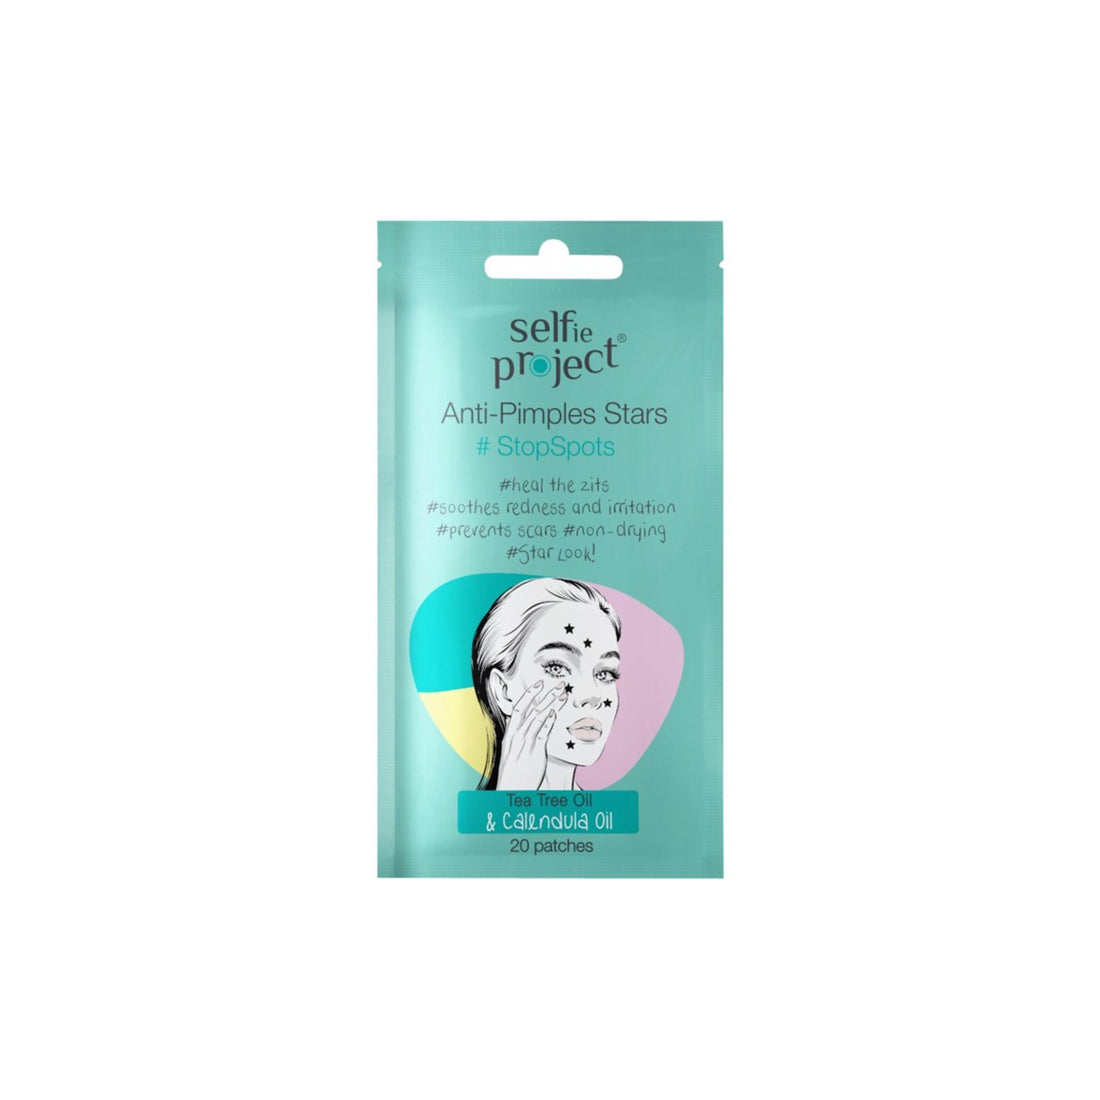 Anti-Pimples Cleansing Patches for blemishes